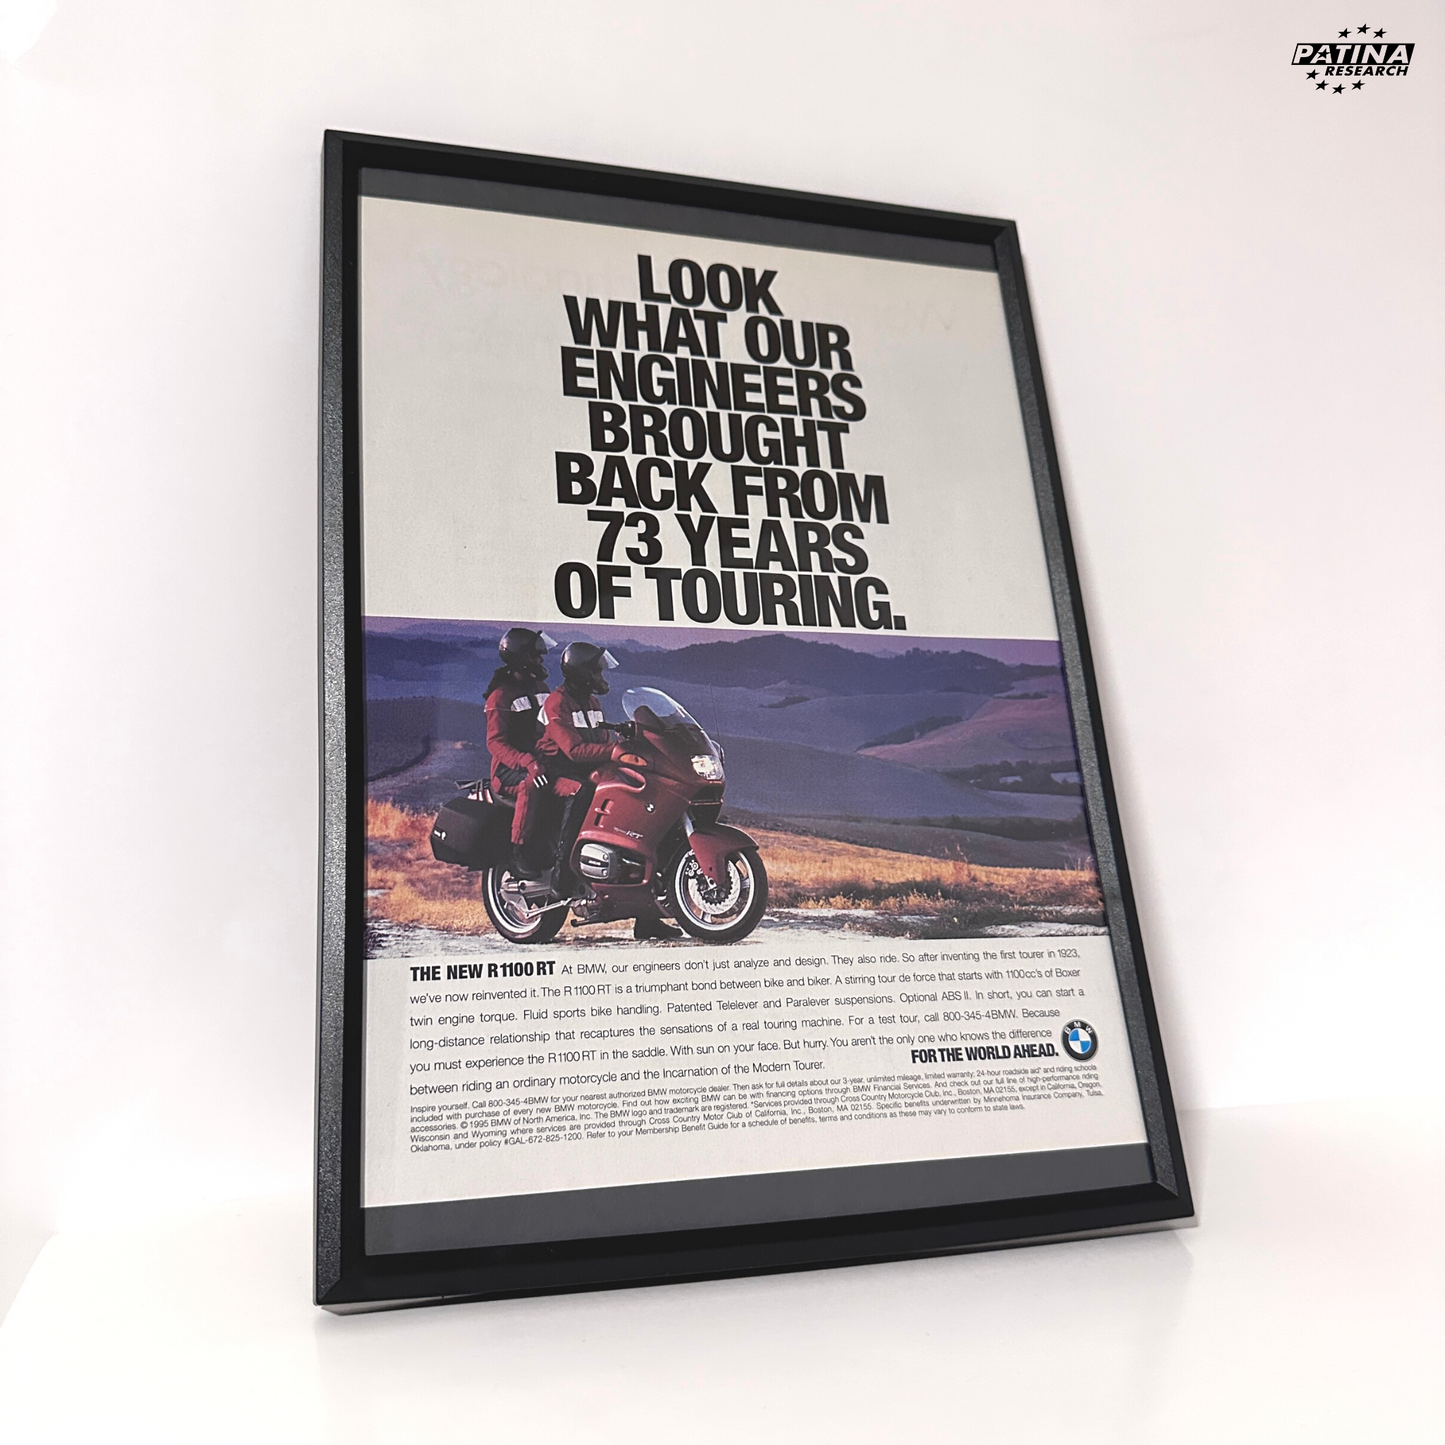 Bmw engineers brought back framed ad